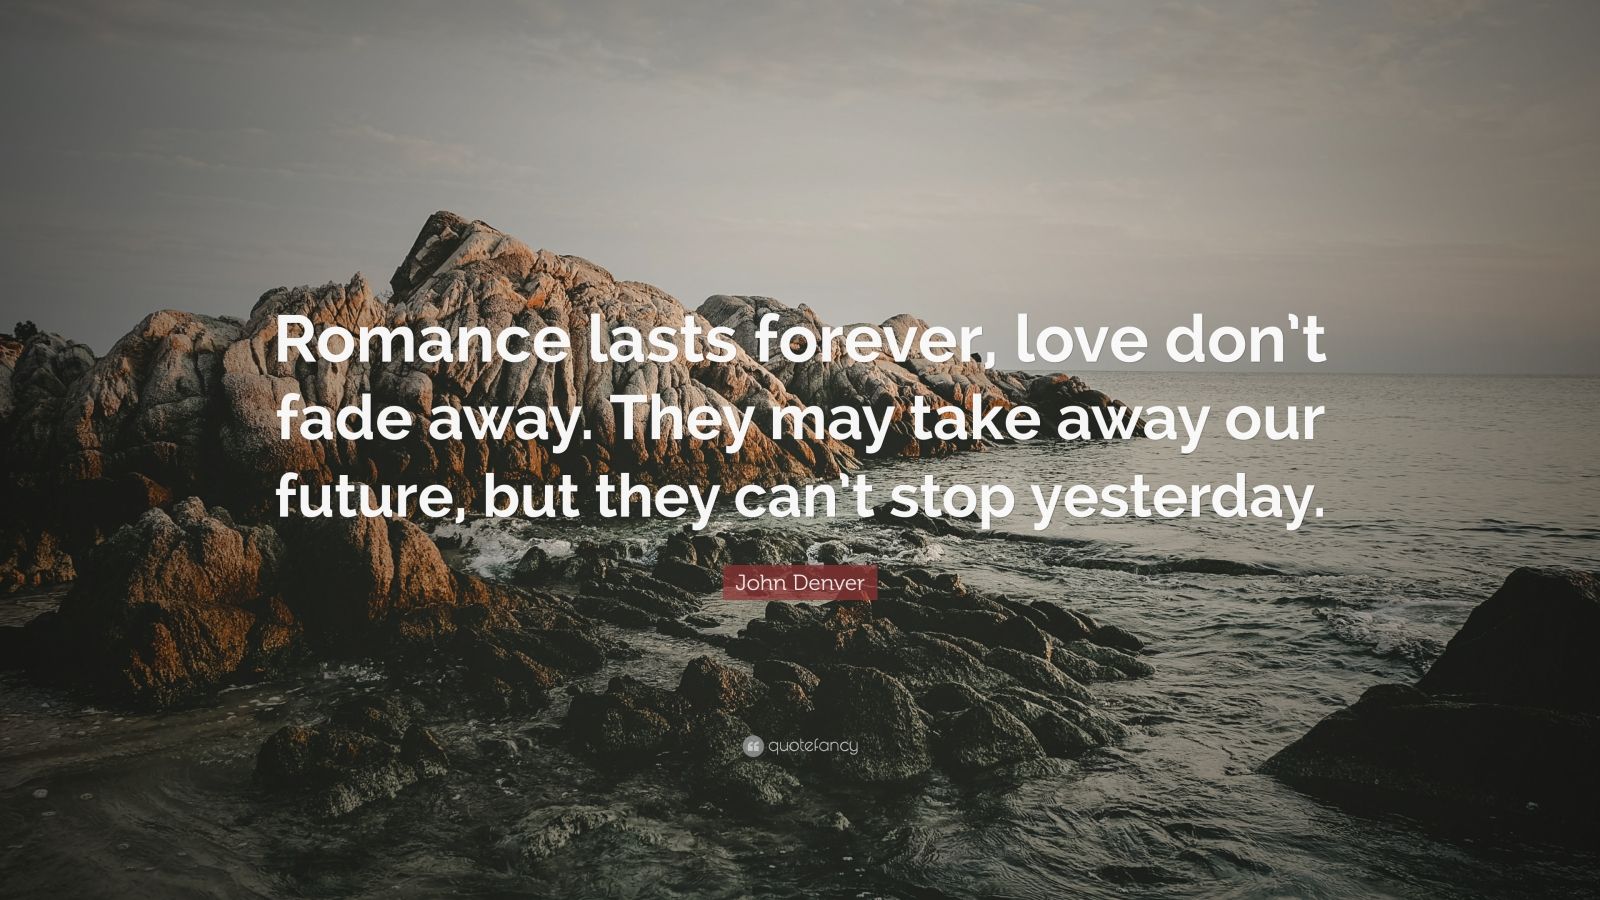 John Denver Quote: “Romance lasts forever, love don't fade away. They may  take away our